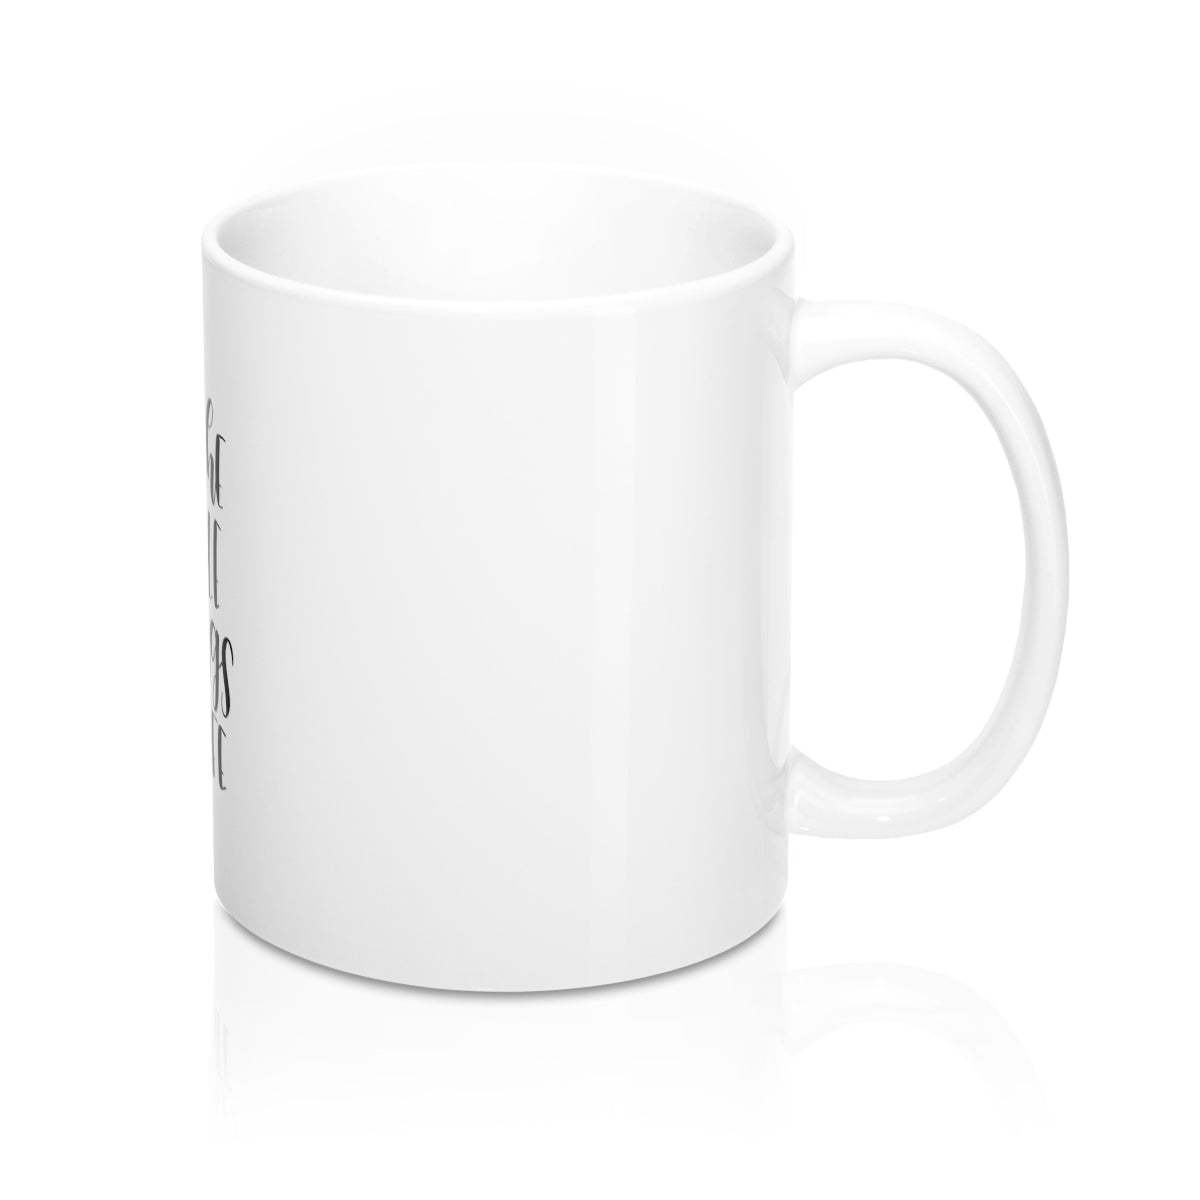 Its The Little Things In Life 11oz Ceramic Mug - Inspired By Savy